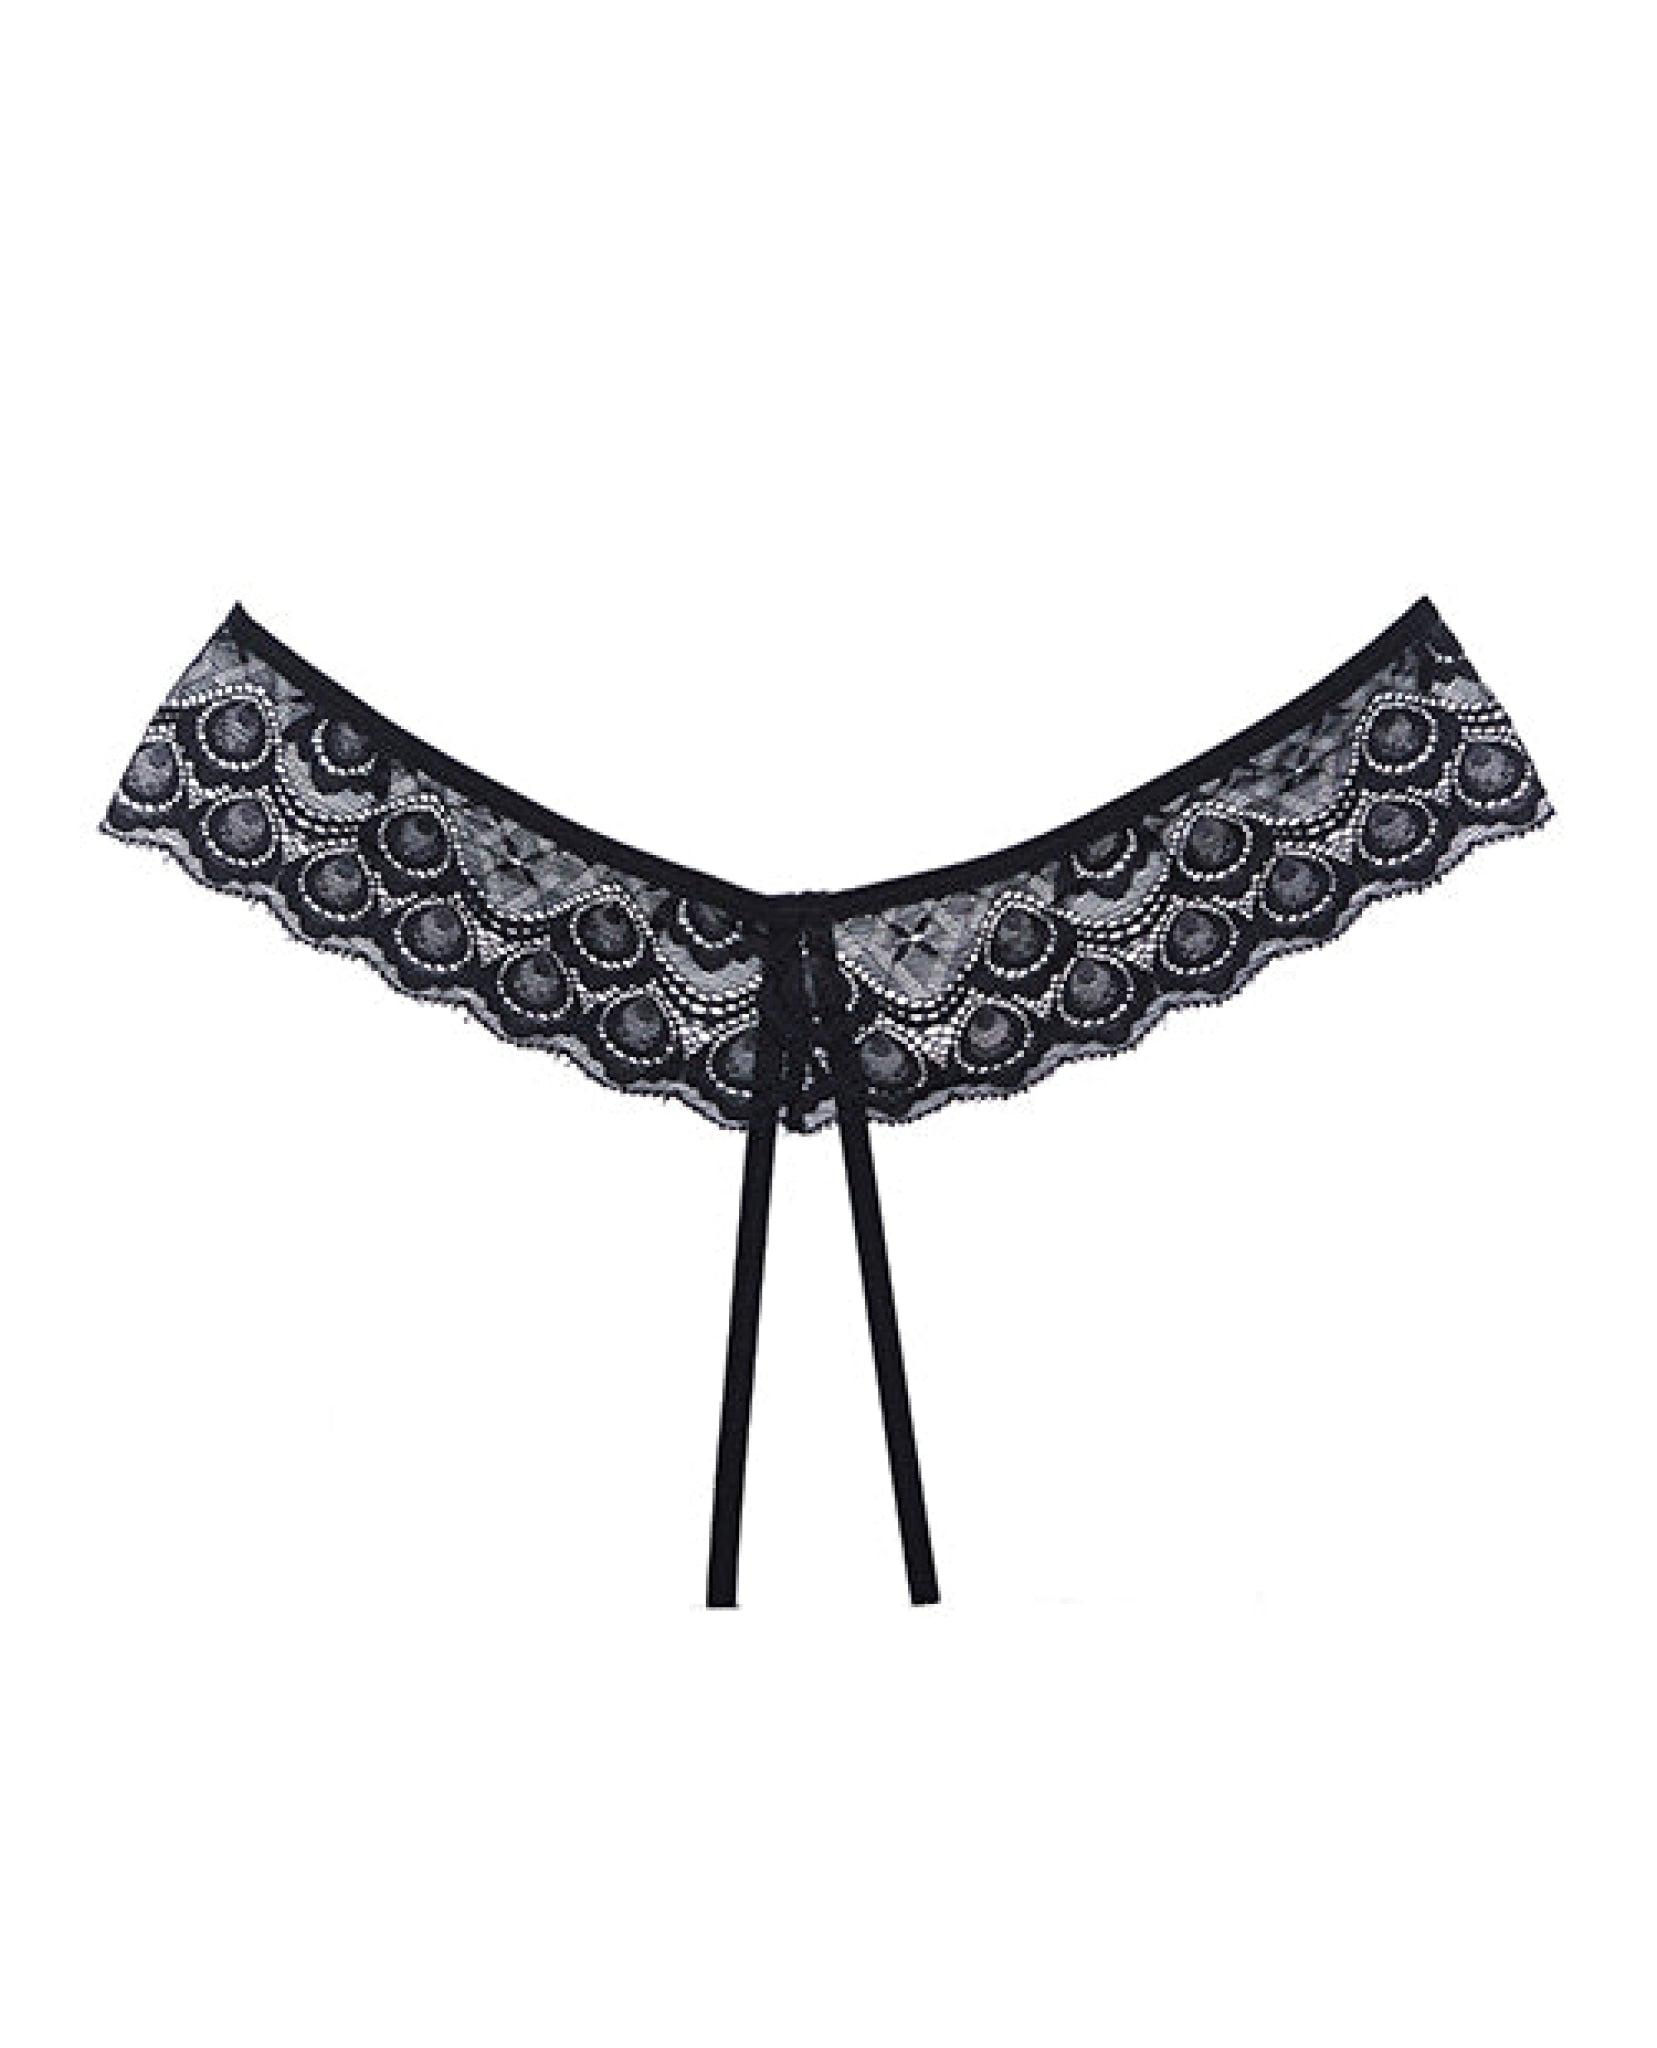 Adore Foreplay Lace & Mesh Front Open Panty Black O-s Allure